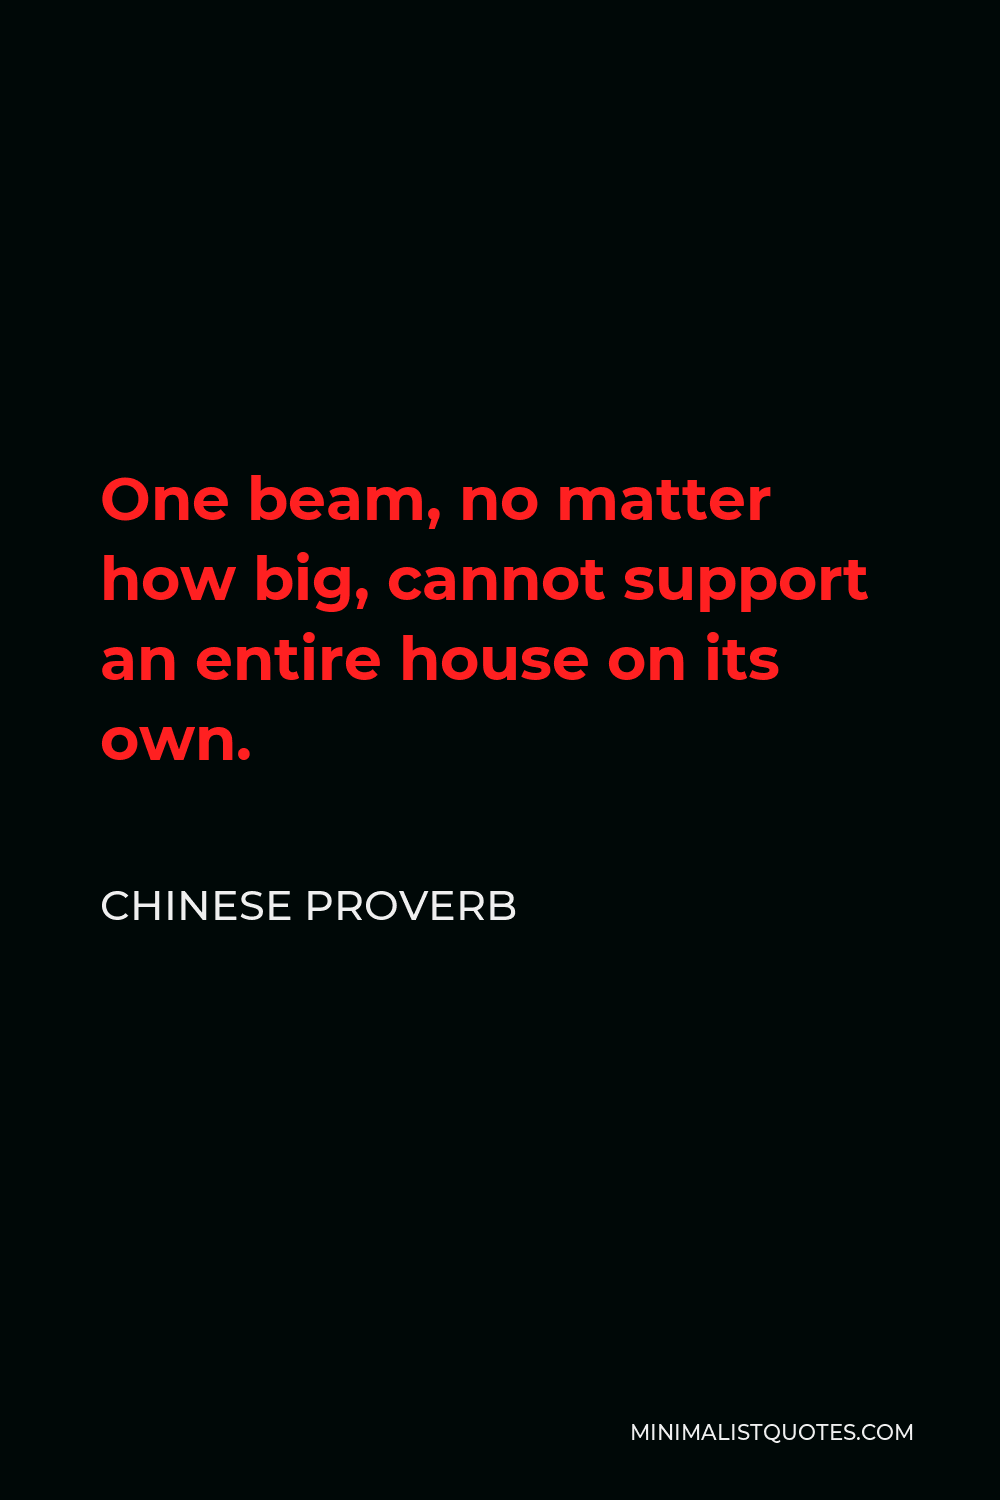 Chinese Proverb Quote - One beam, no matter how big, cannot support an entire house on its own.